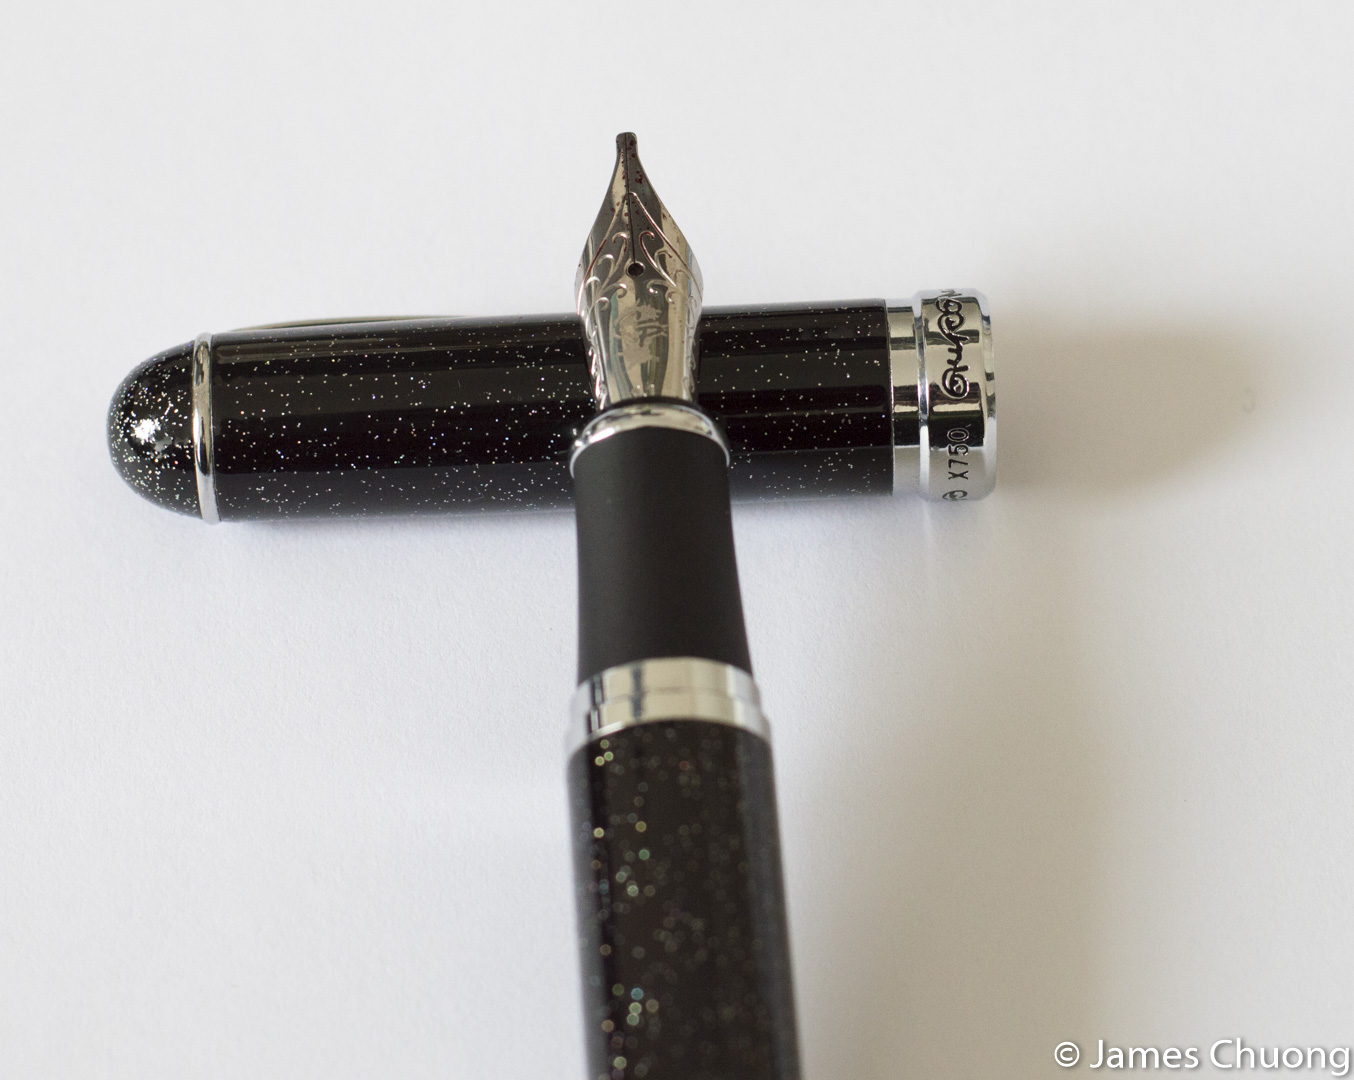 Jinhao X750 with Goulet Nib